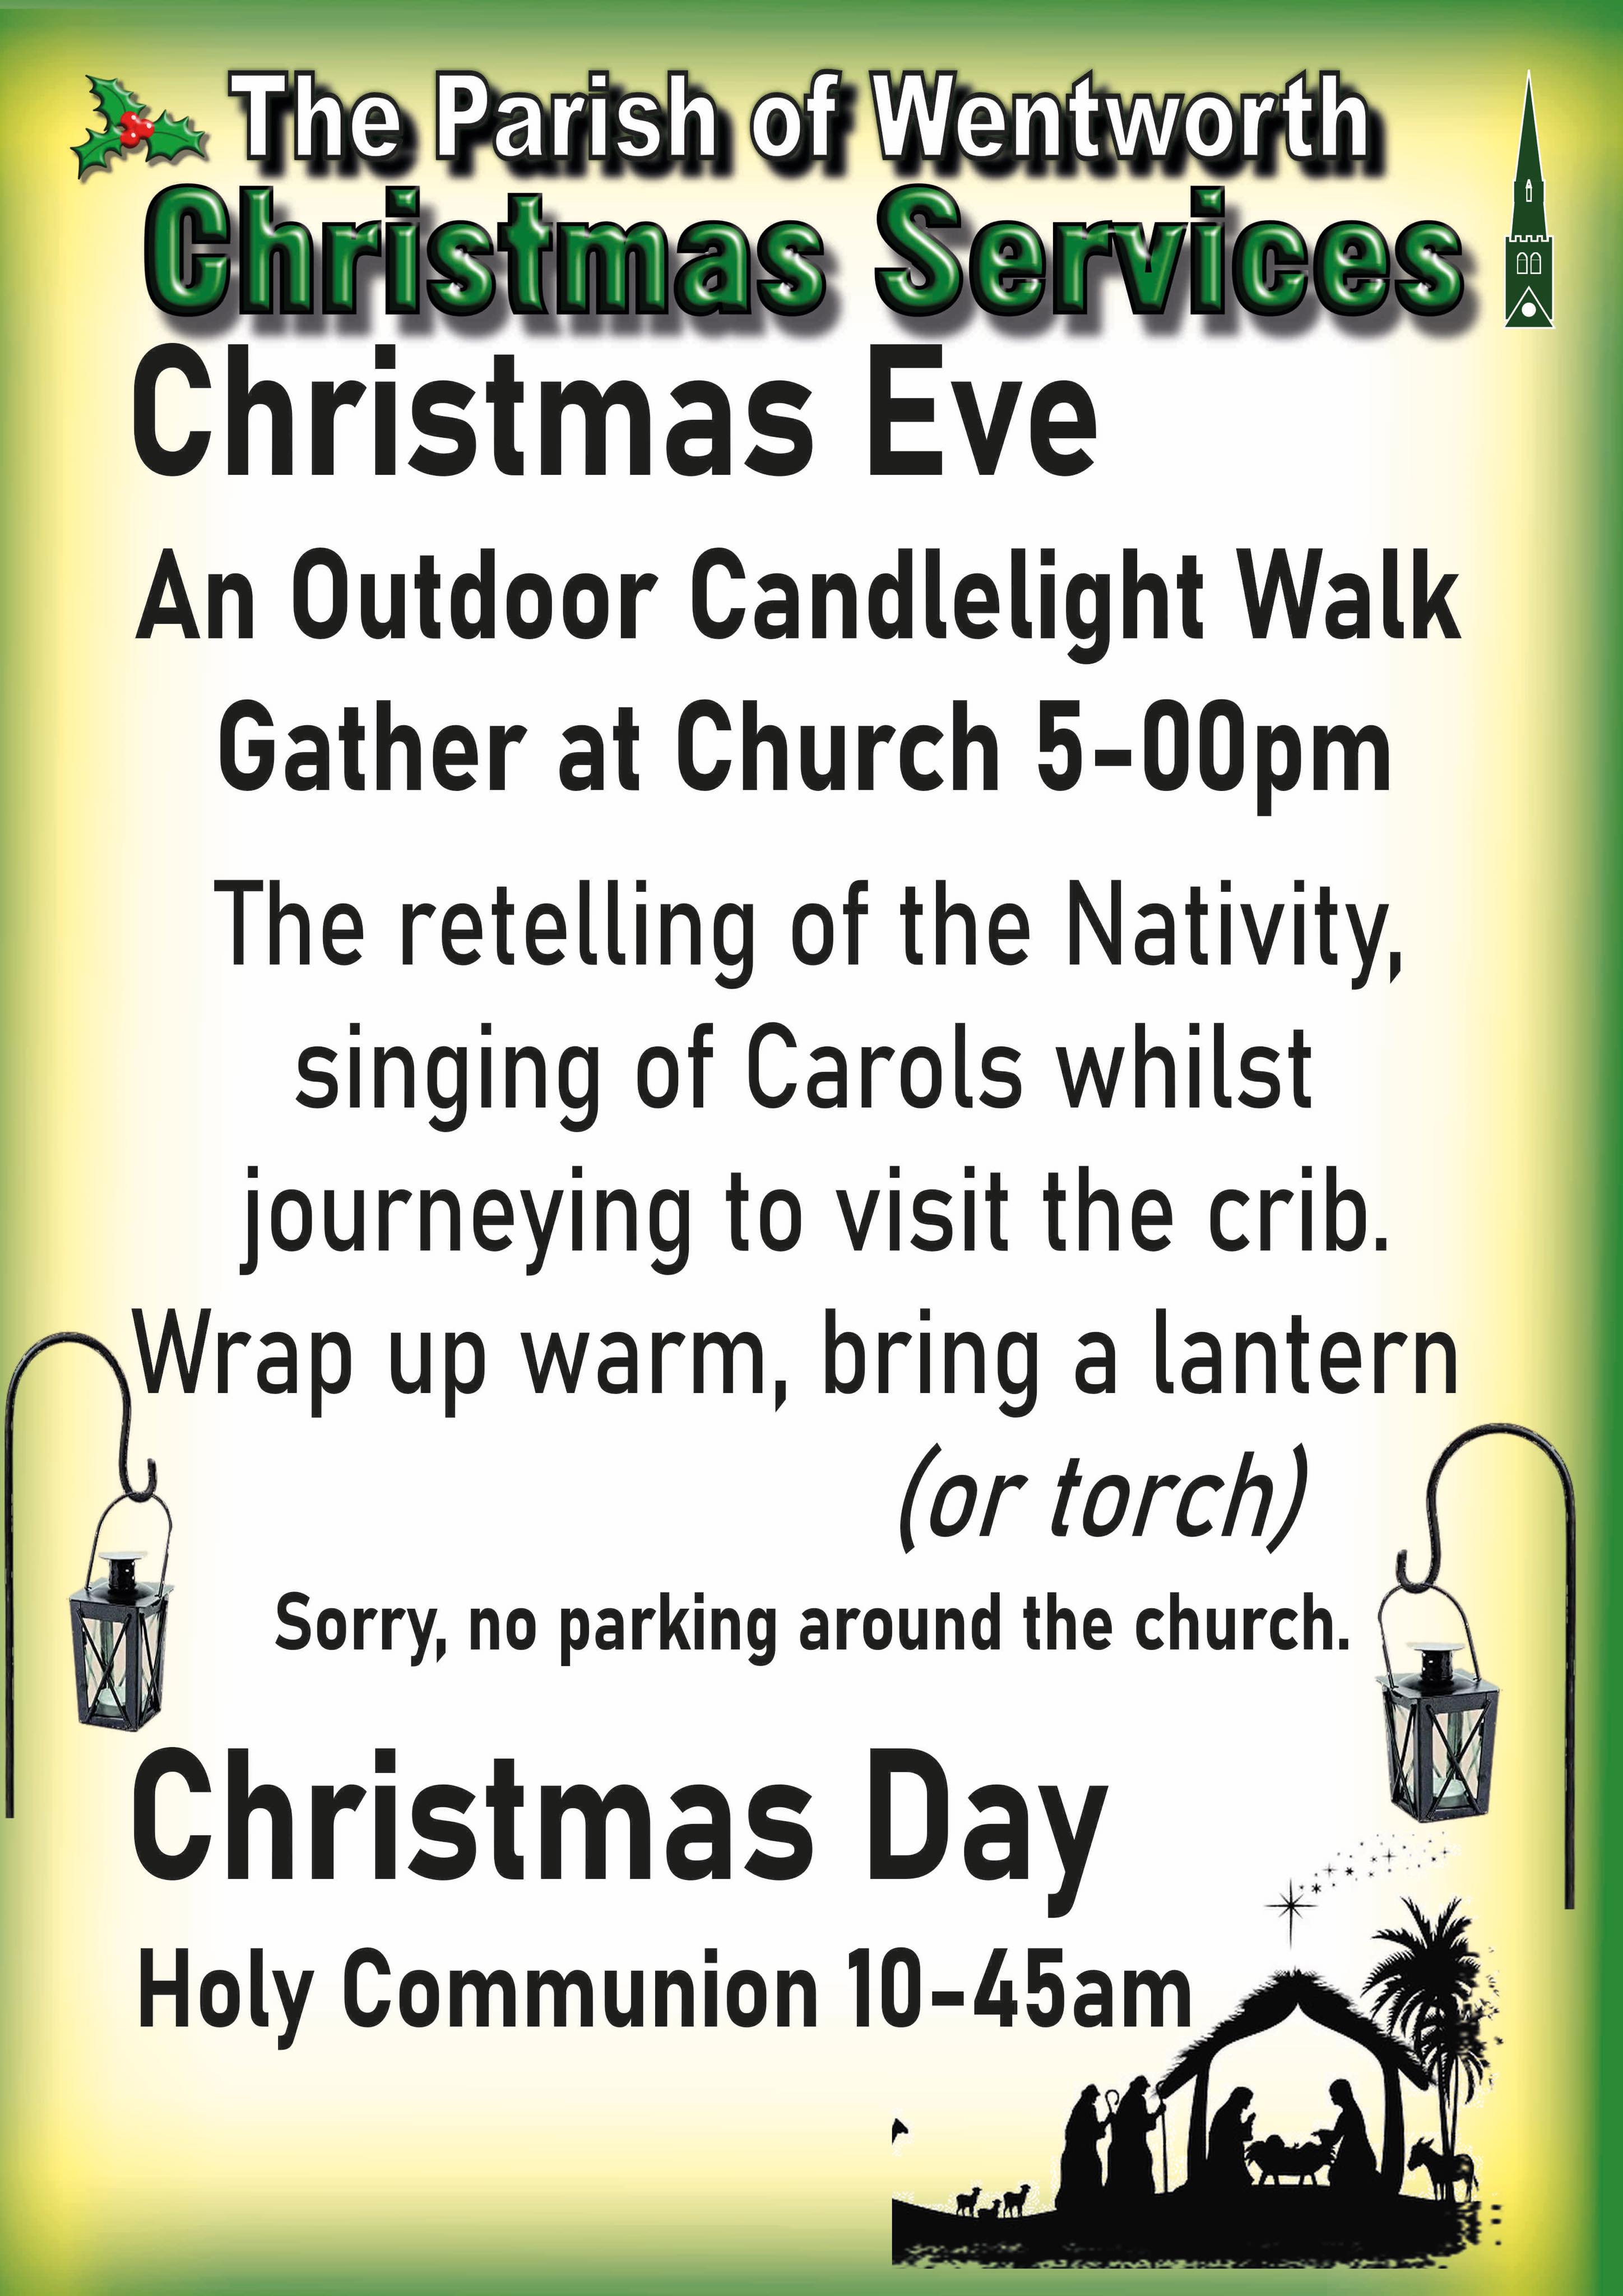 Christmas Services 2021 - Christmas  Eve 5pm, Christmas Day 10.45am. There is no parking around the church on Christmas eve